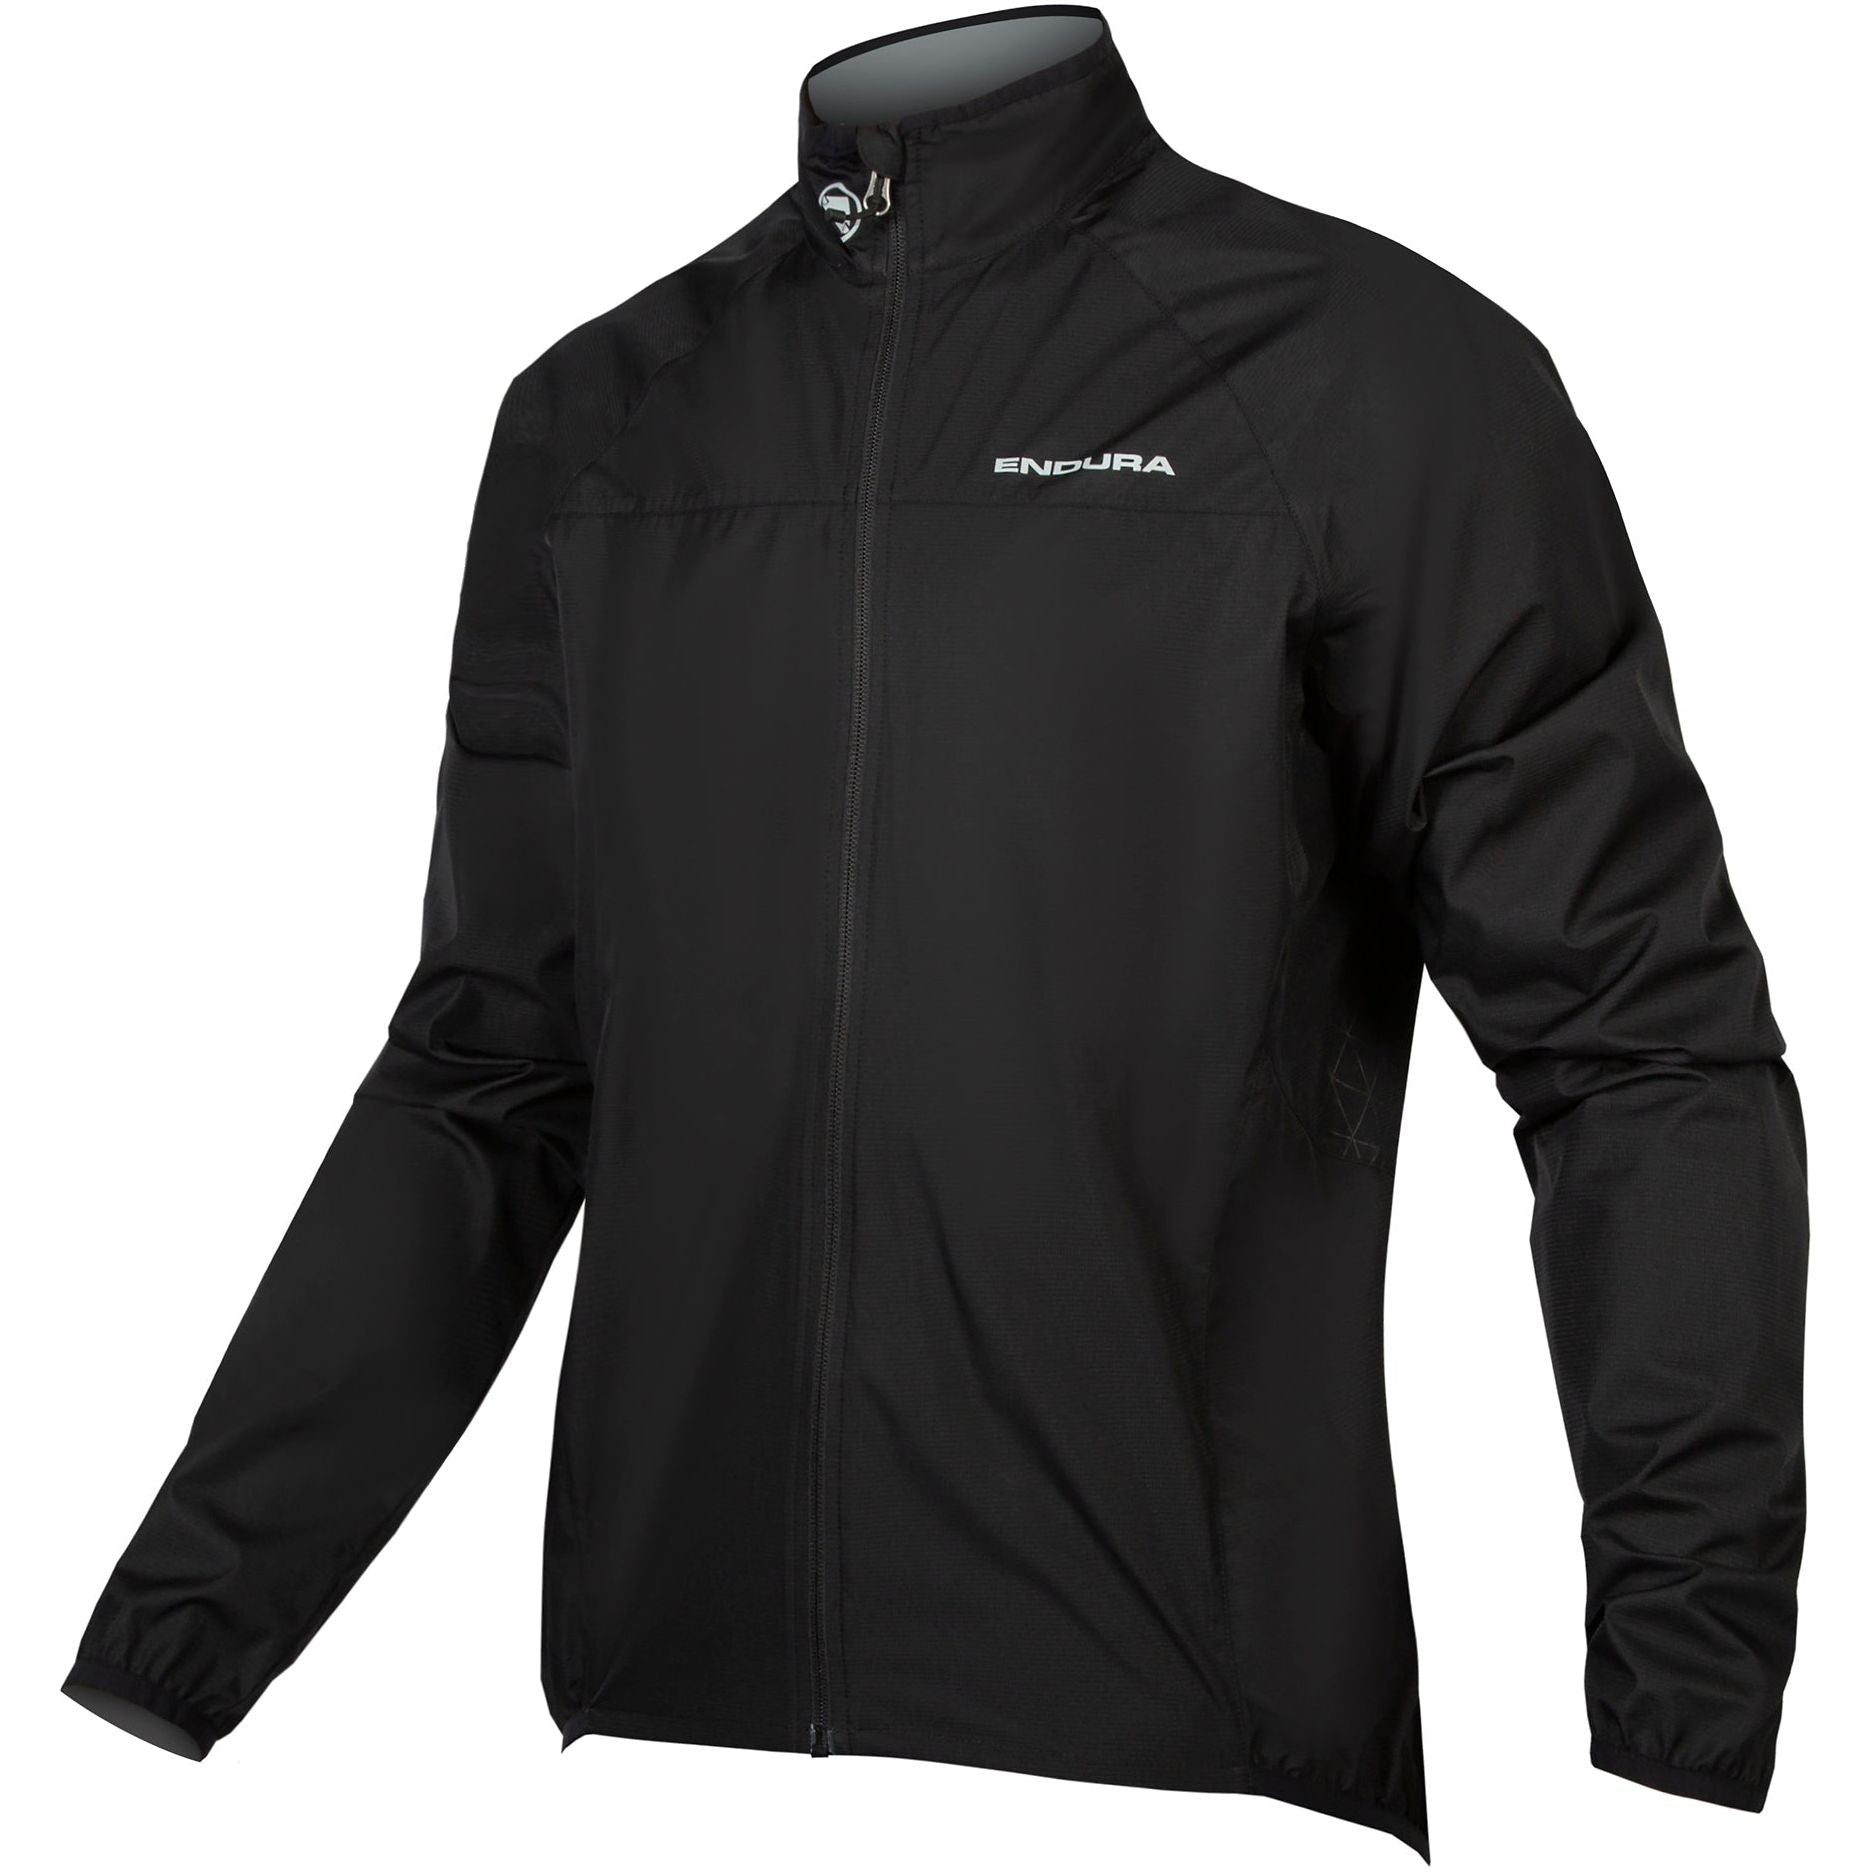 Endura Xtract Ii Jacket E9114Bk Front - Front View